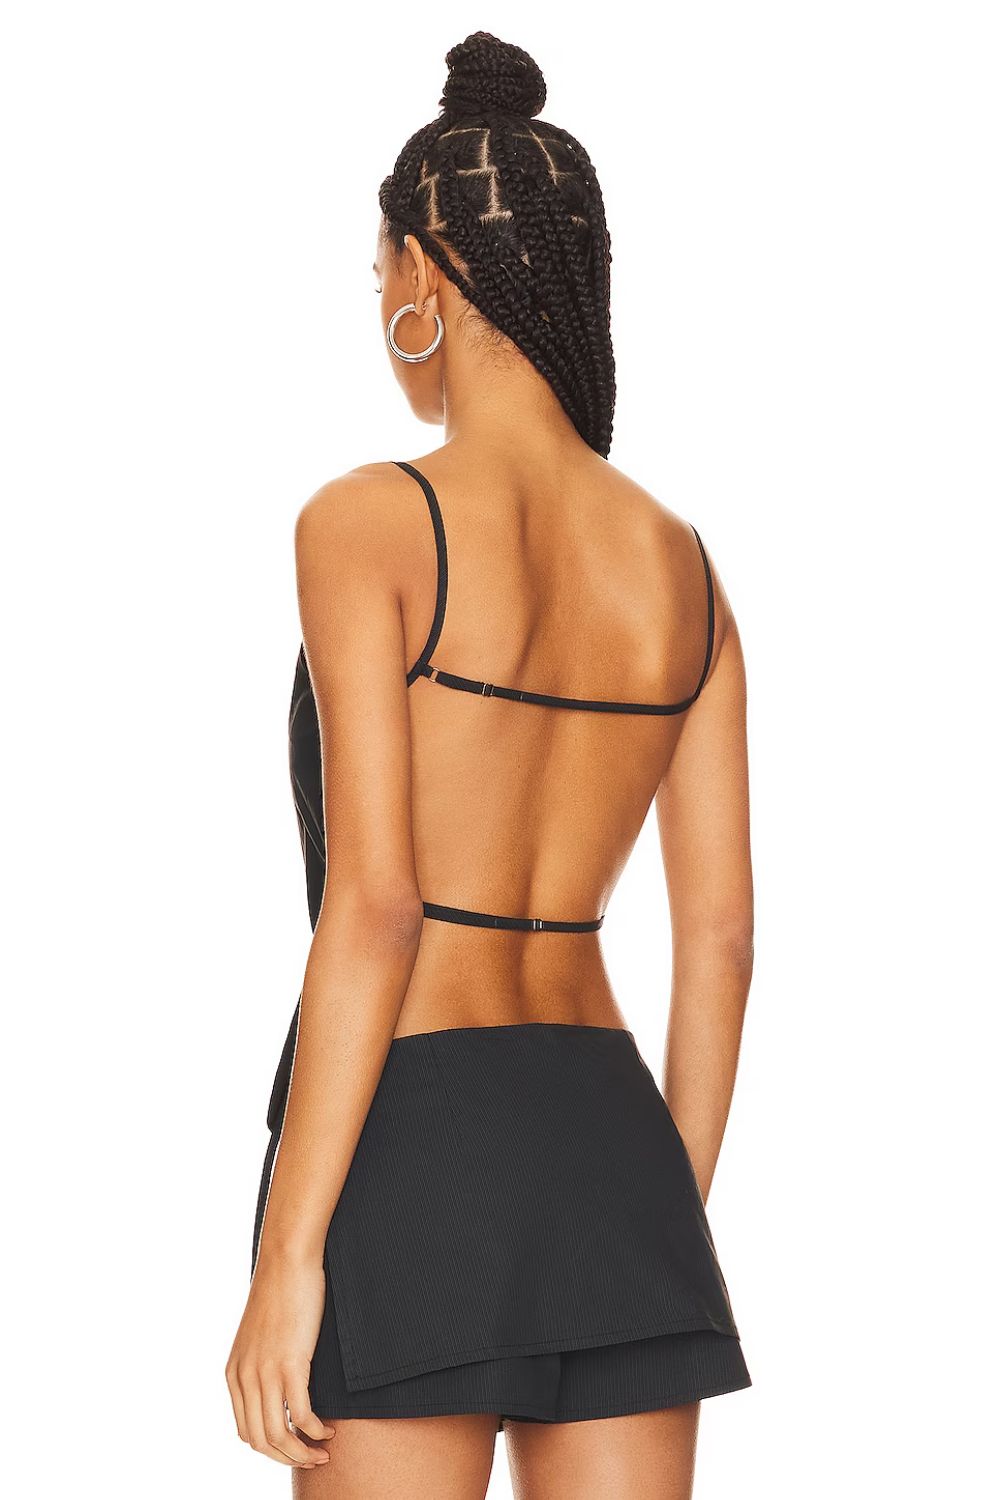 bras-with-tops-Backless-Tops